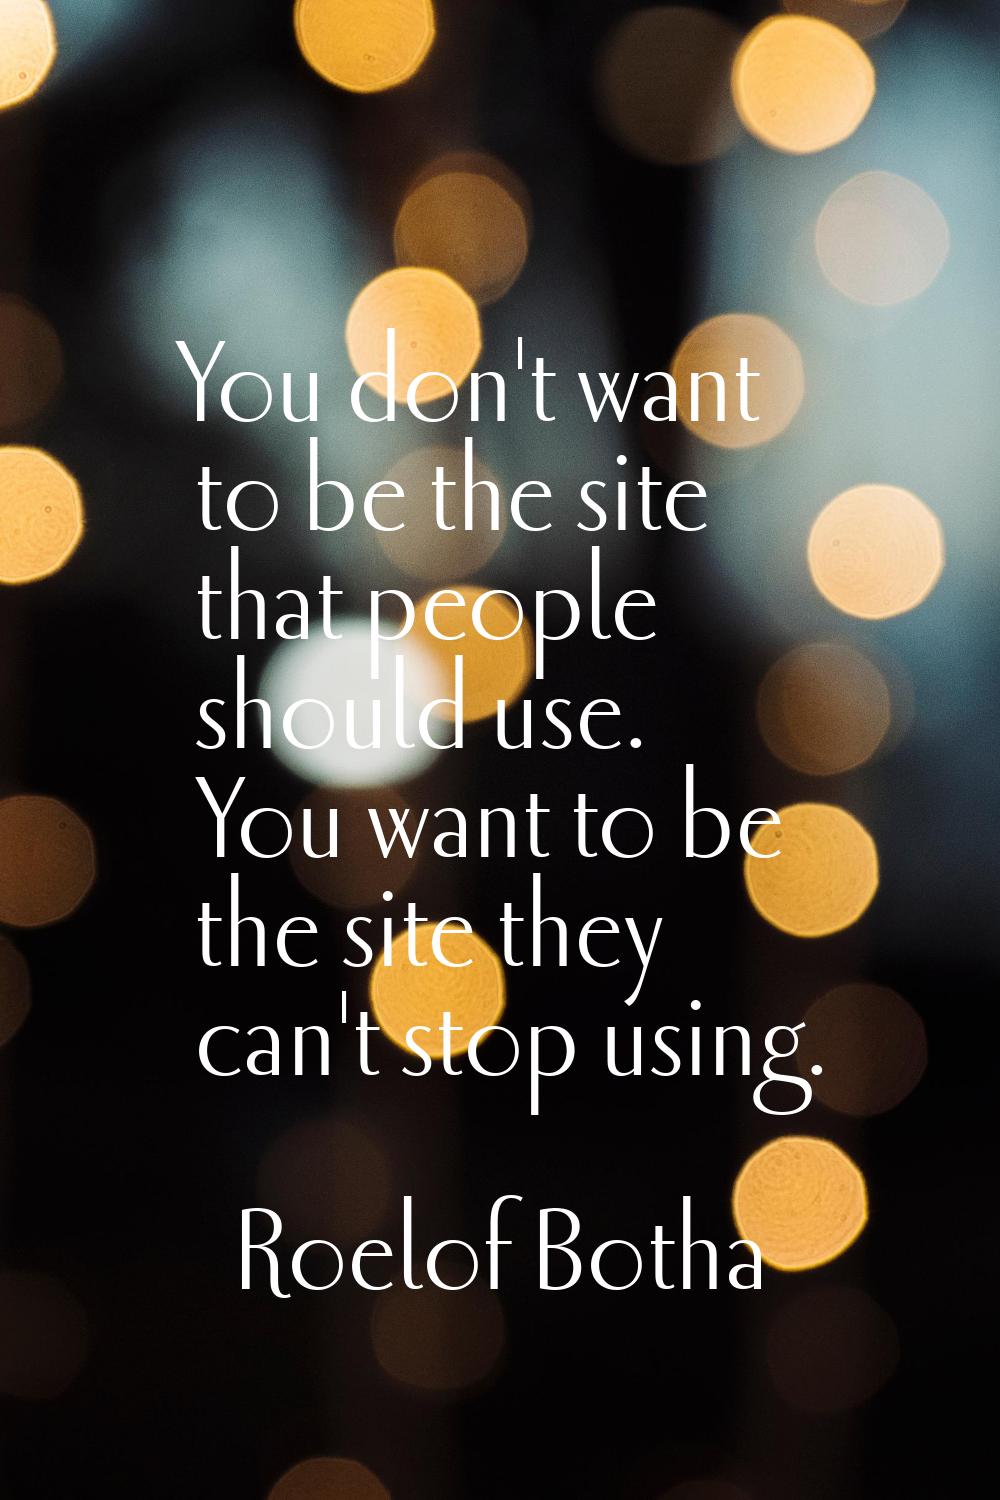 You don't want to be the site that people should use. You want to be the site they can't stop using